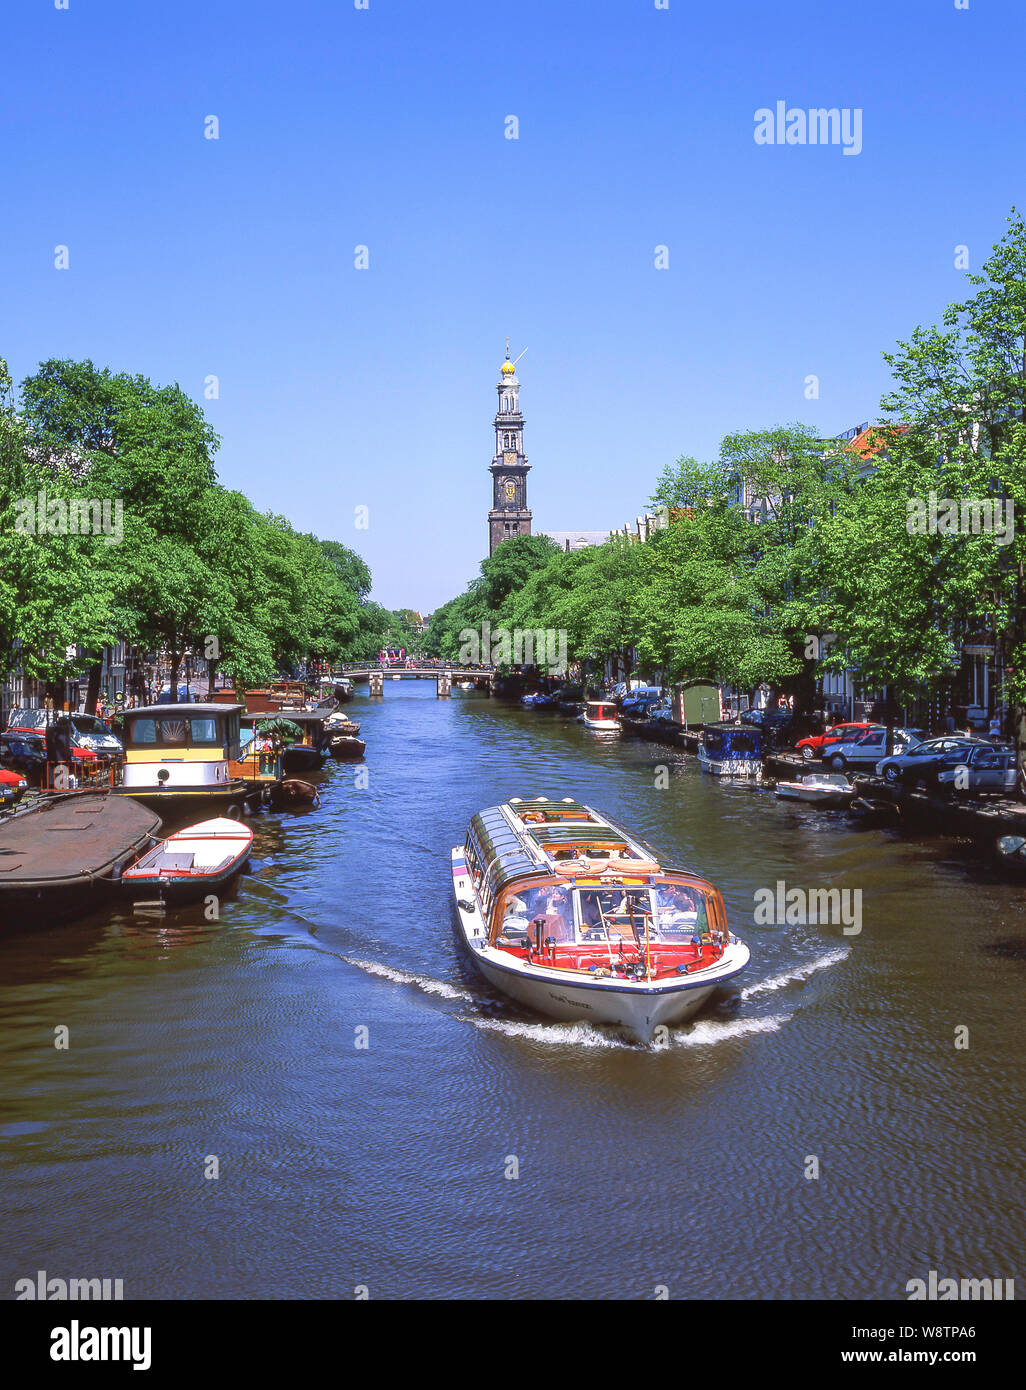 The Westertoren tower and excursion canal boat, Grachtengordel, Amsterdam, Noord-Holland, Kingdom of the Netherlands Stock Photo